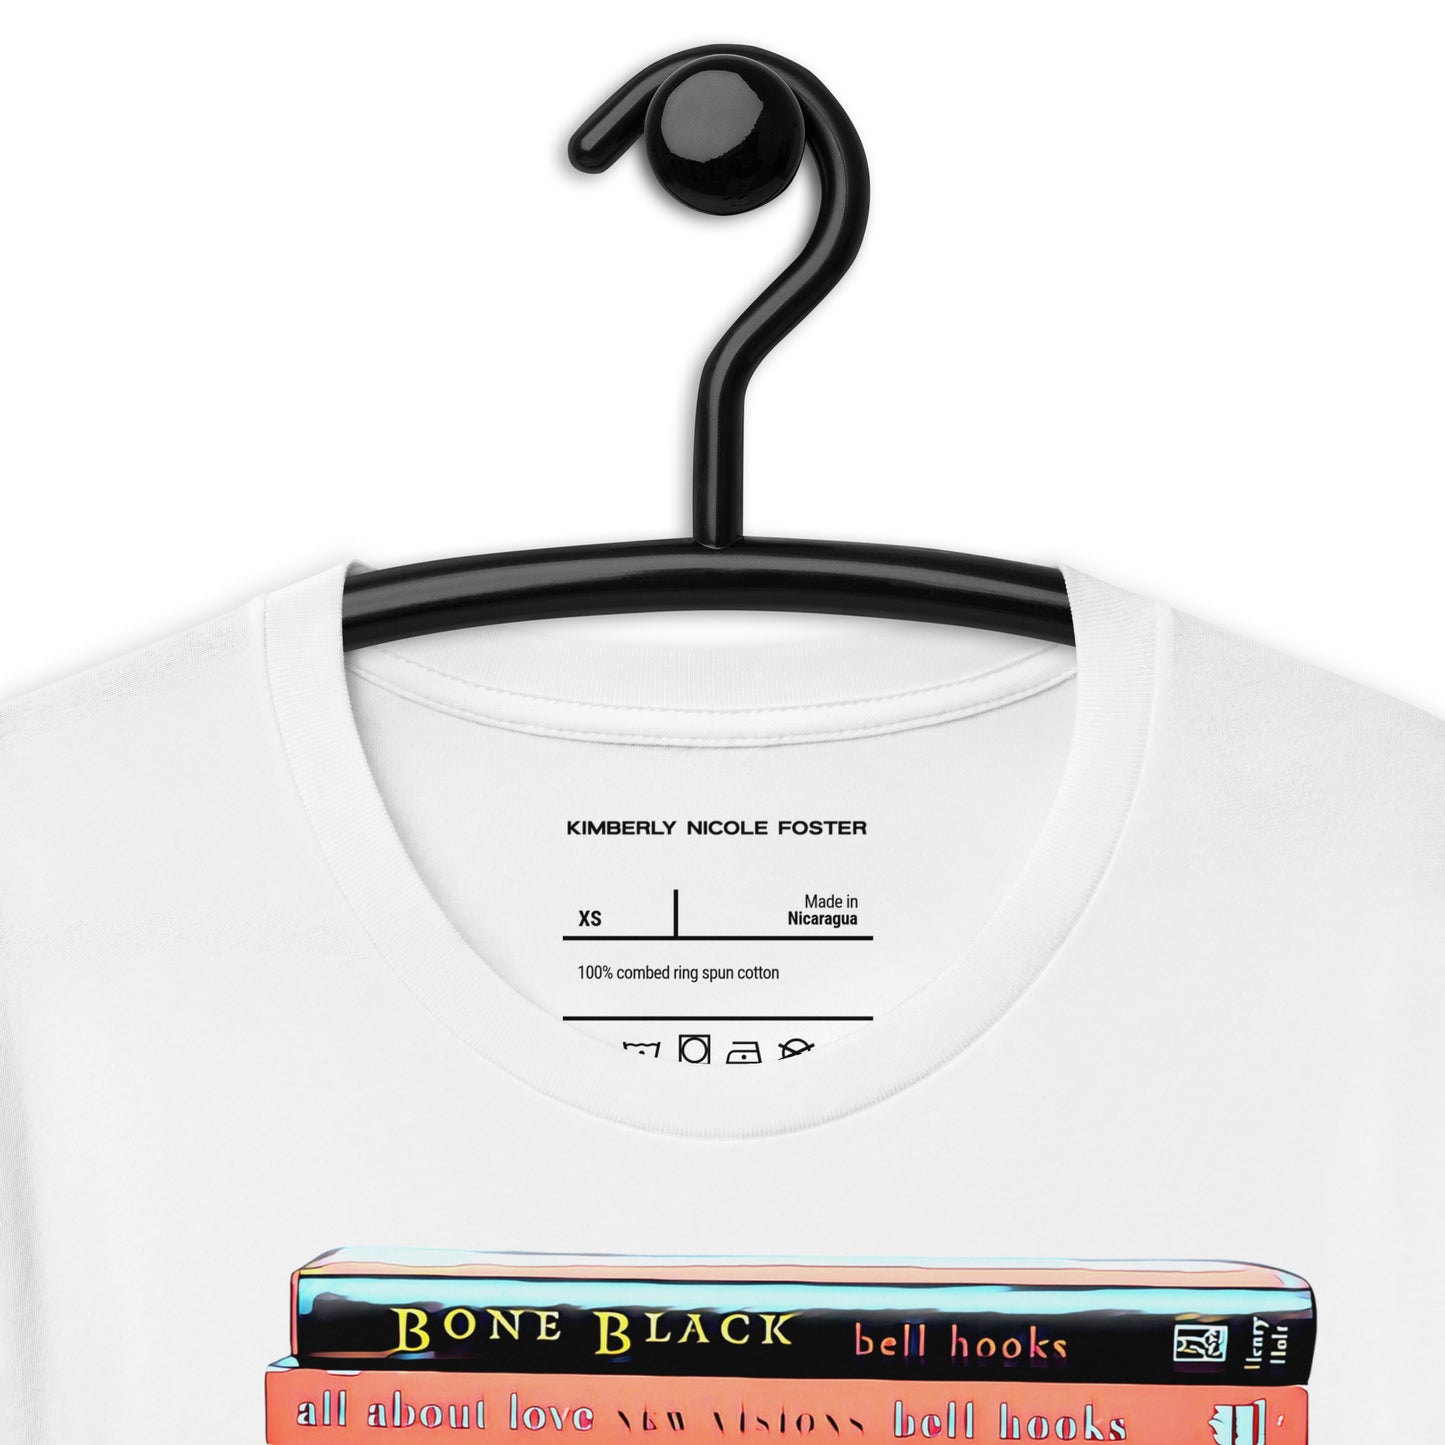 DO THE READING T-Shirt